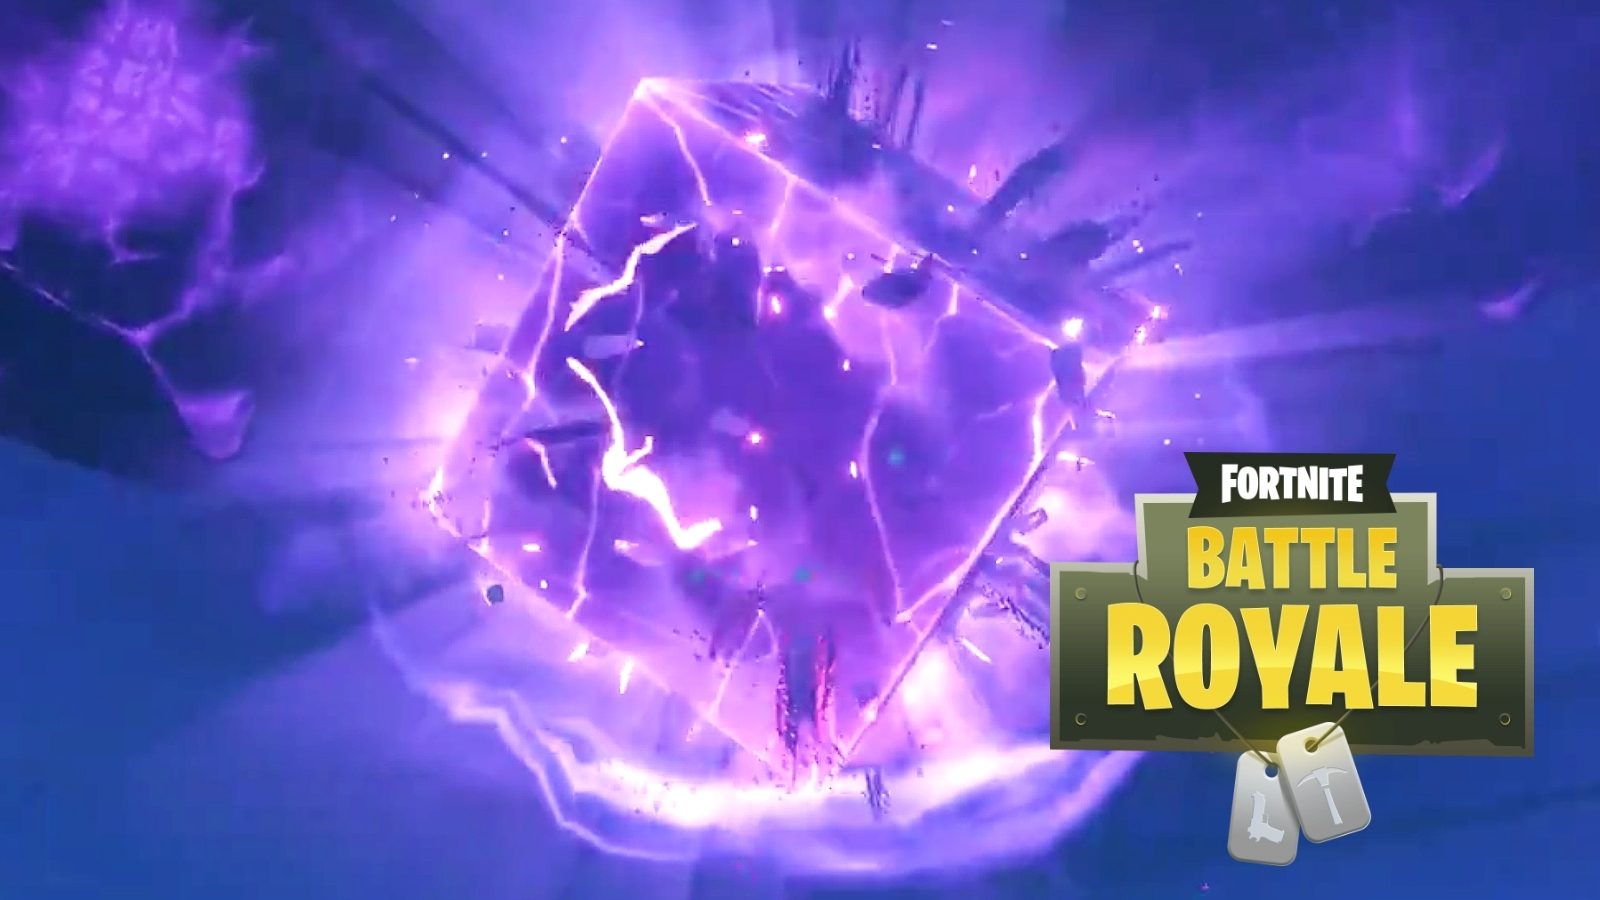 Free download The Purple Cube in Fortnite has cracked open and is